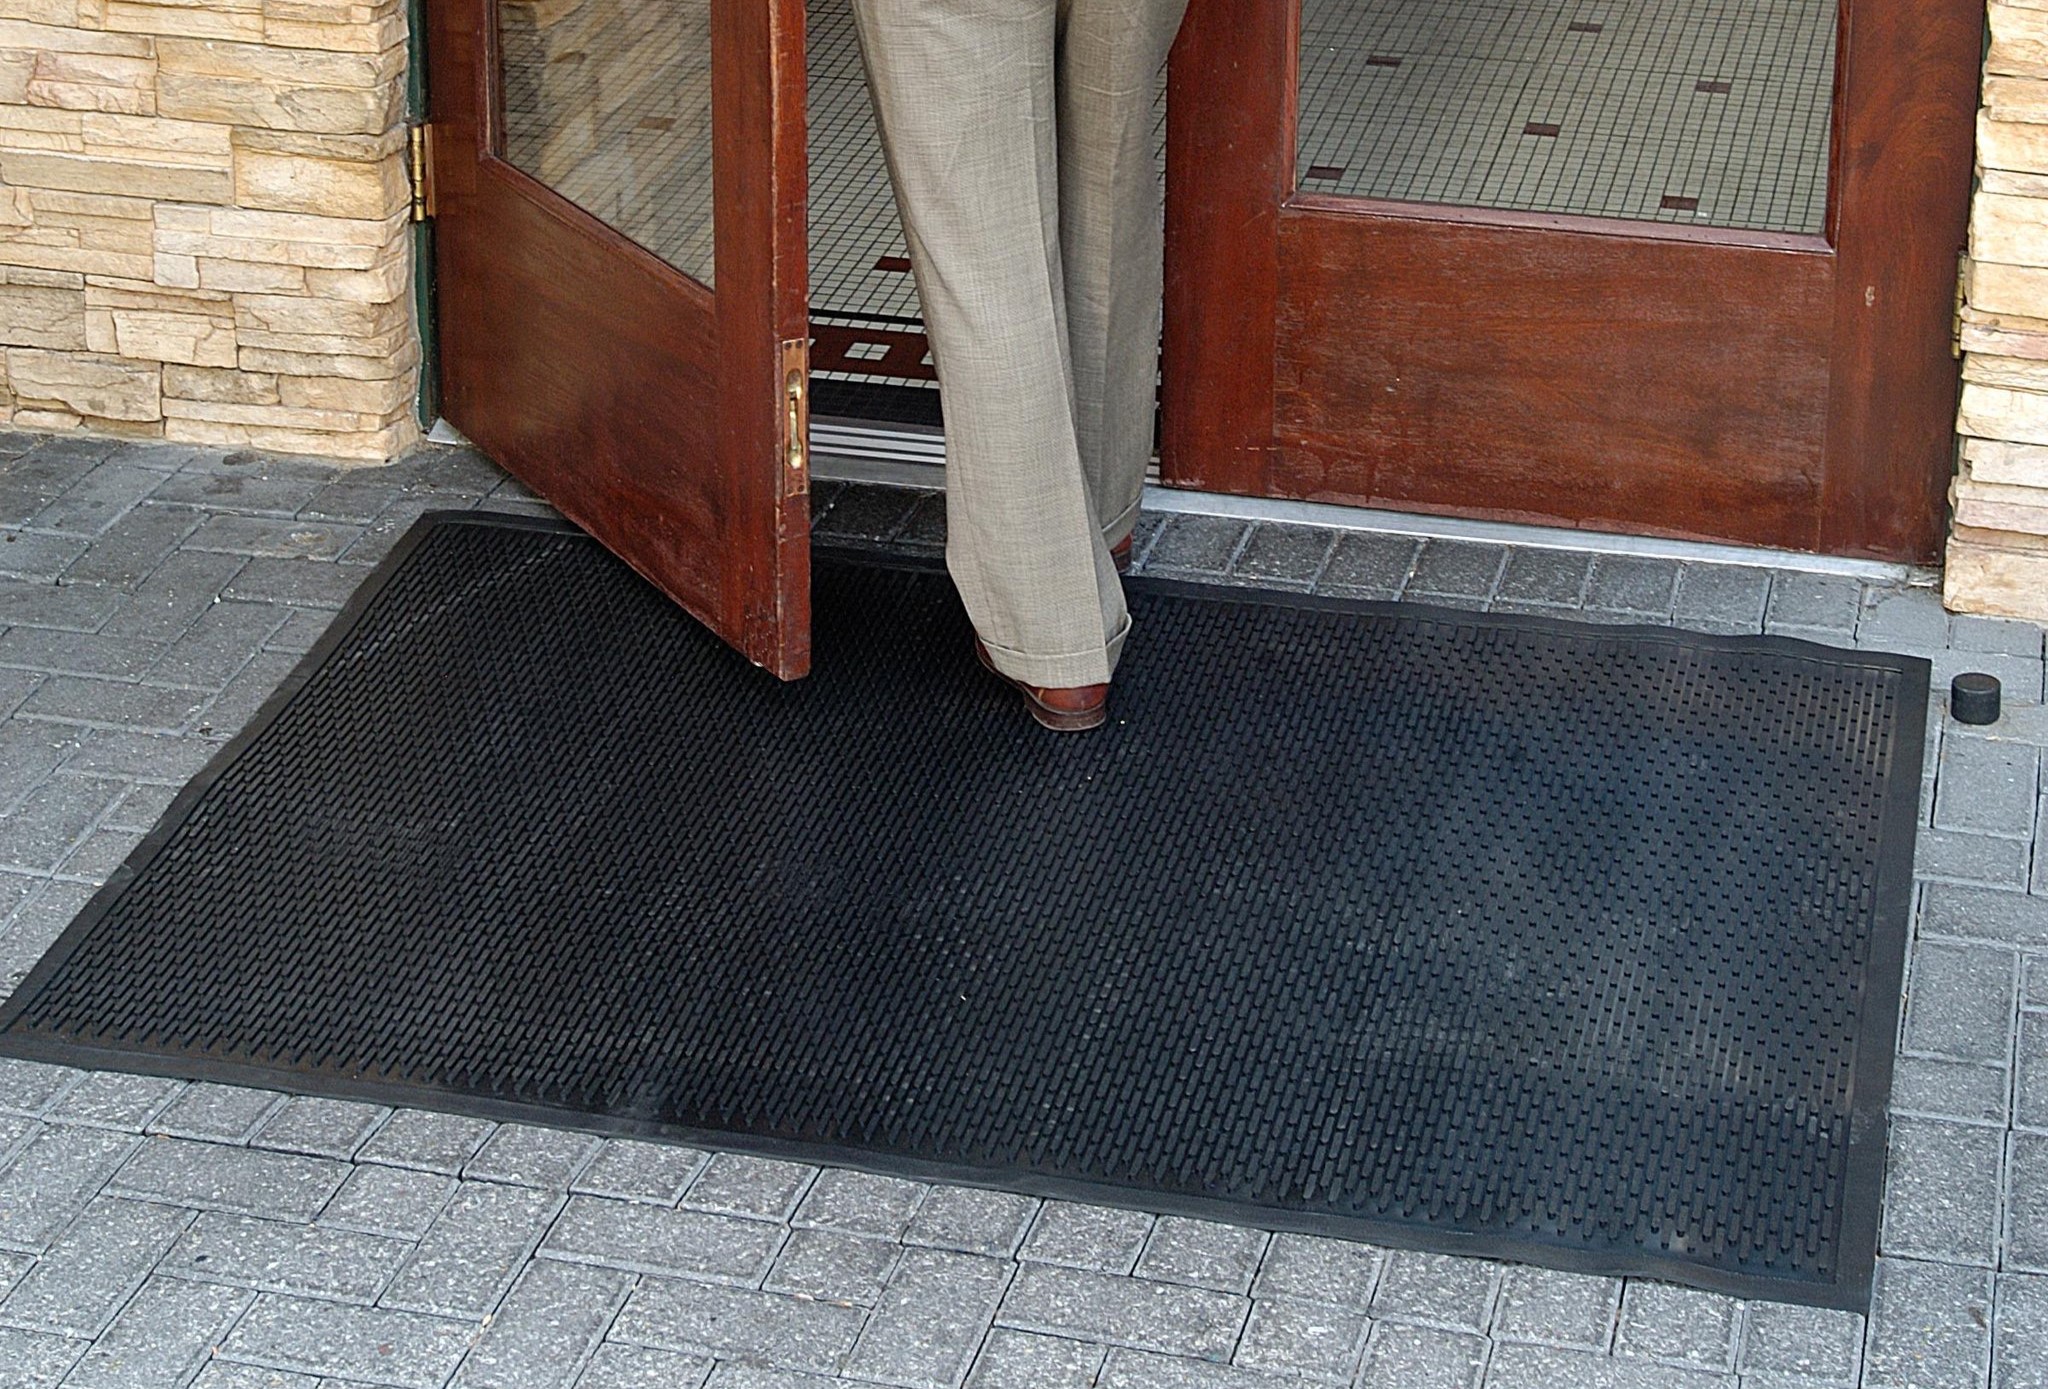 A person walking through a door and stepping on a scraper mat.